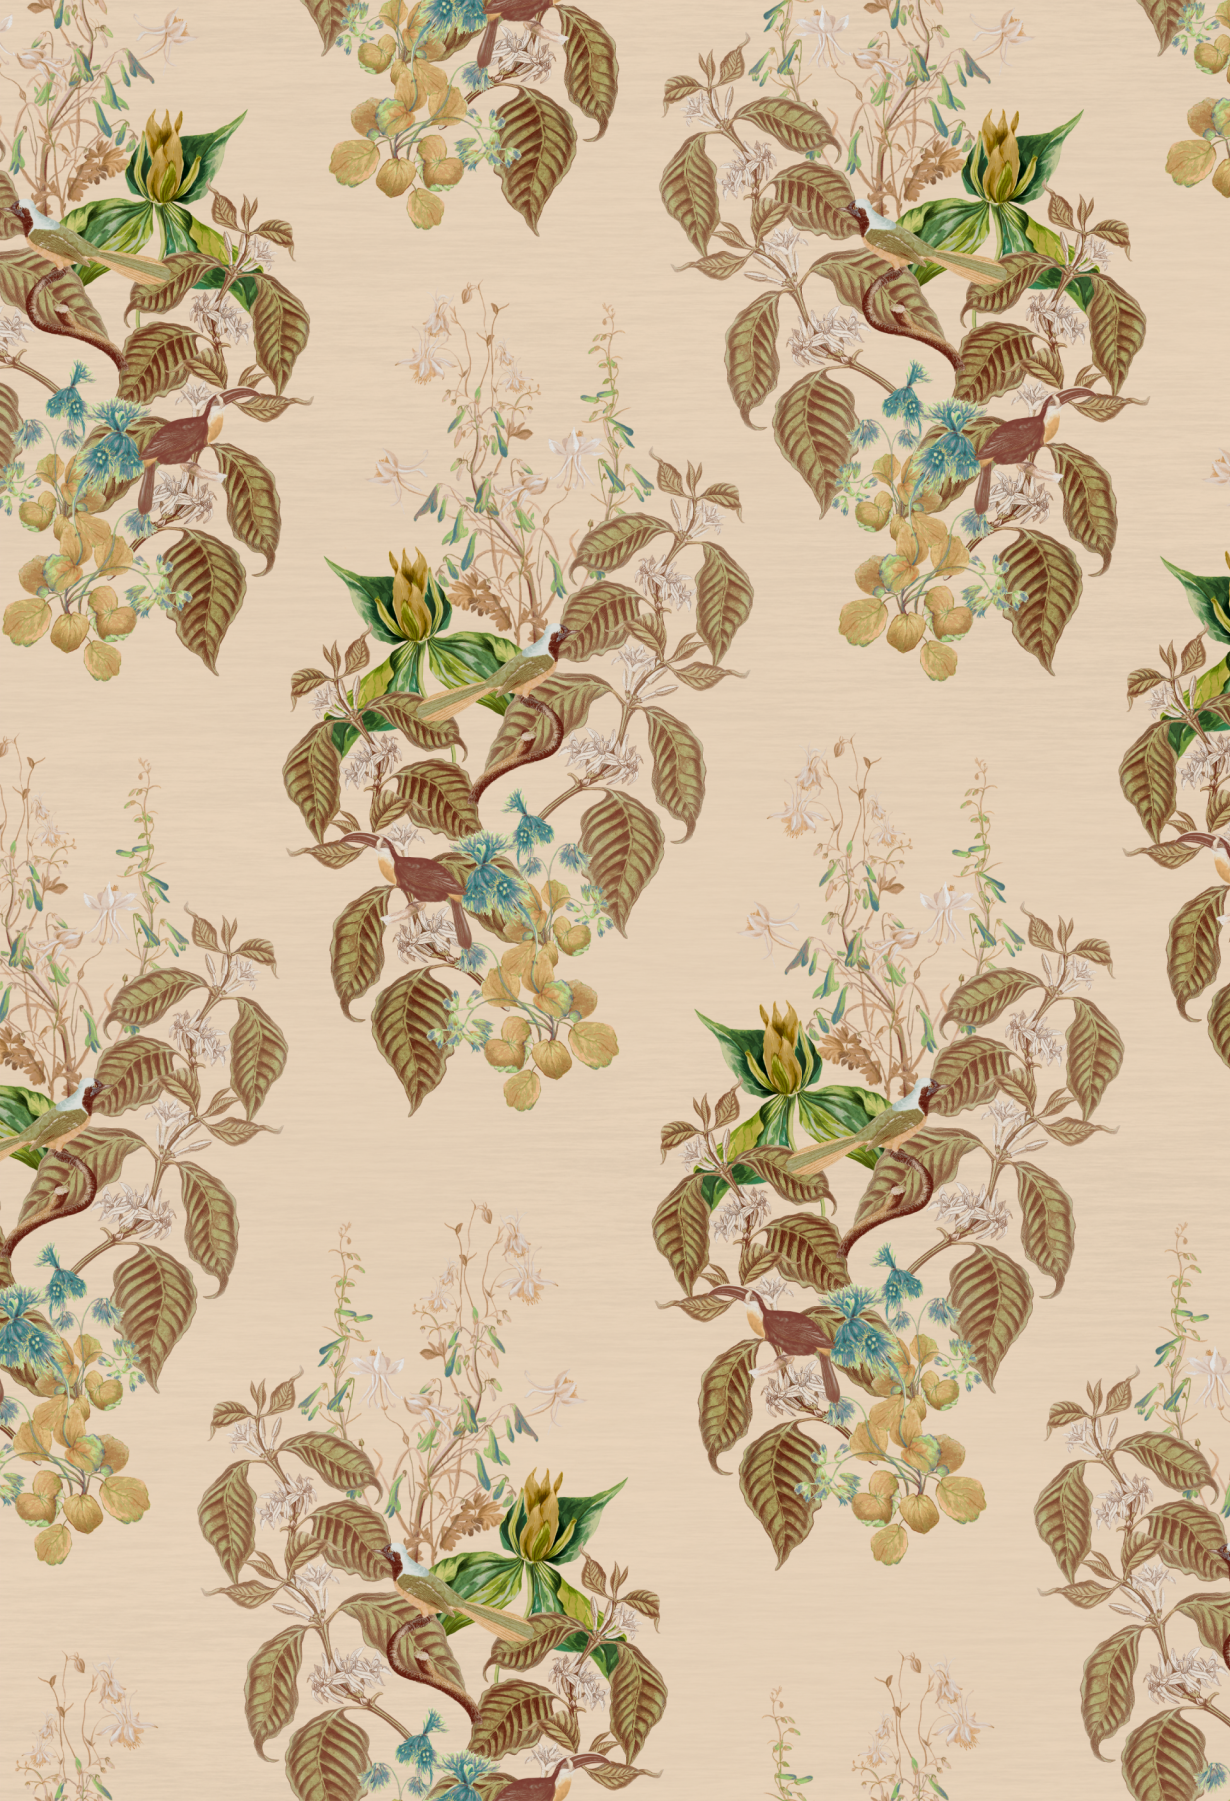 A luxury Deus ex Gardenia Aviary Isle Wallpaper in Ecru with birds, flowers and leaves.